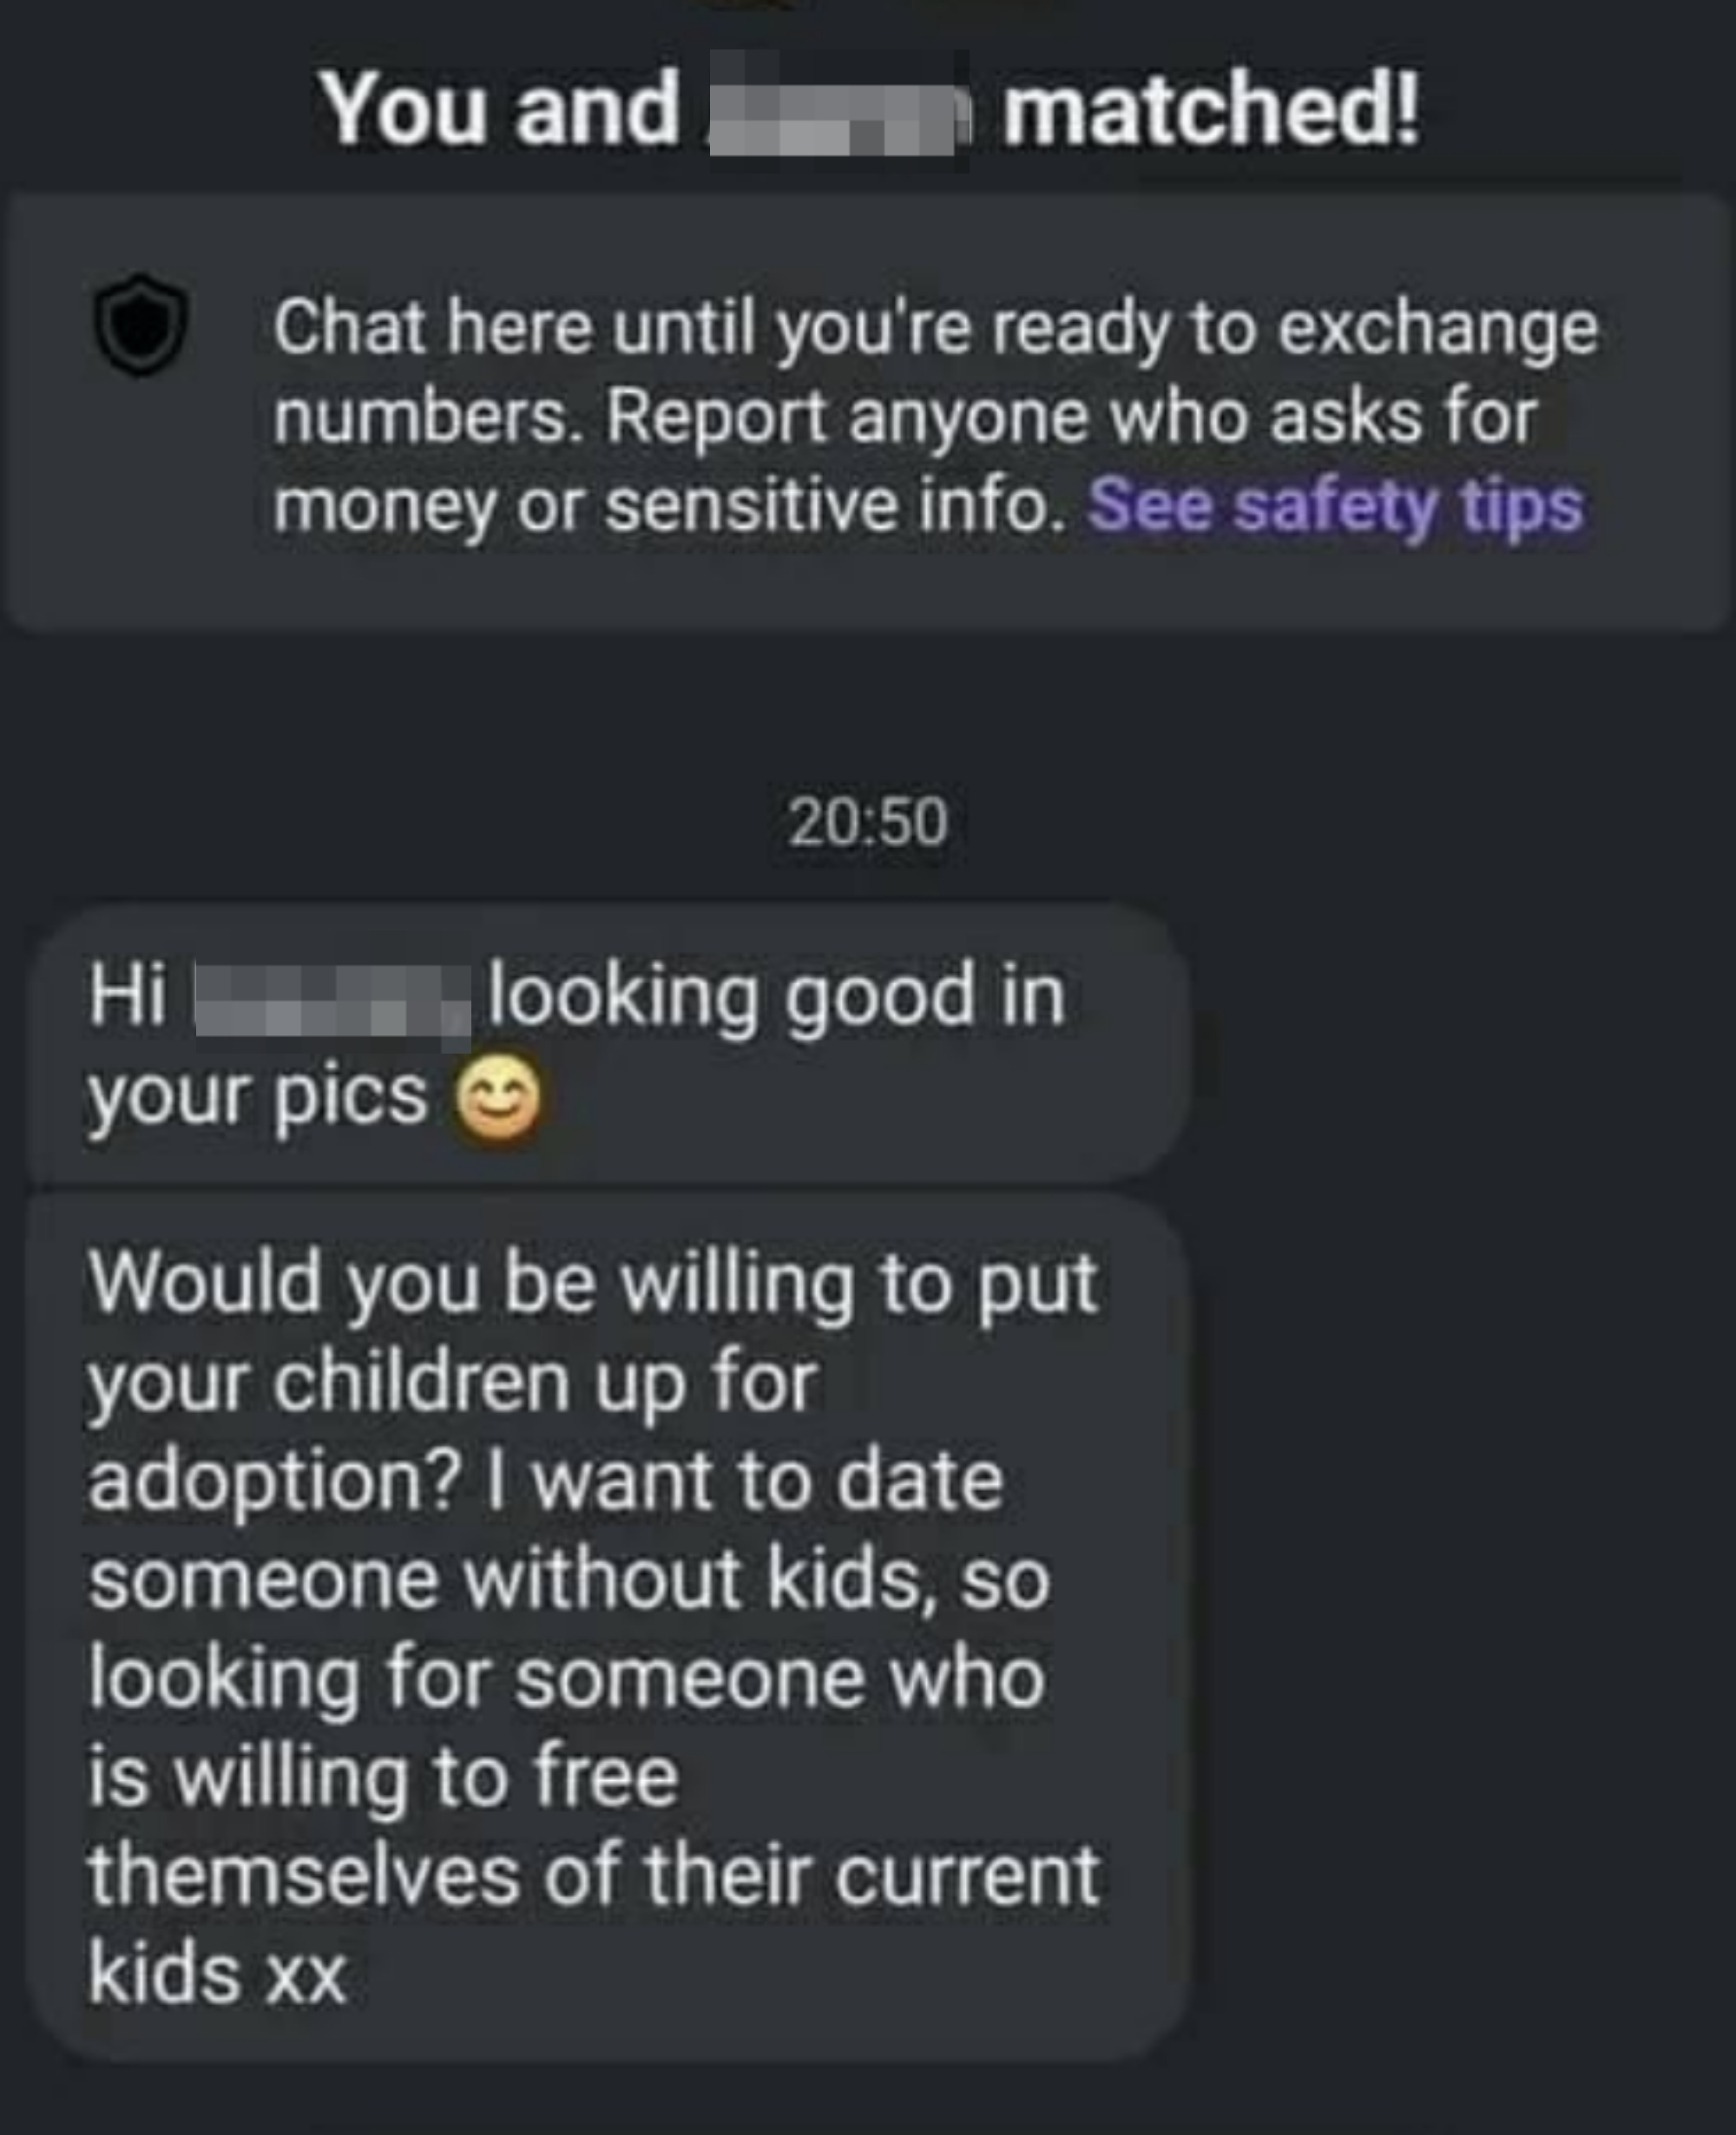 Text exchange in a dating app where person asks if other would consider putting their children up for adoption so they can date